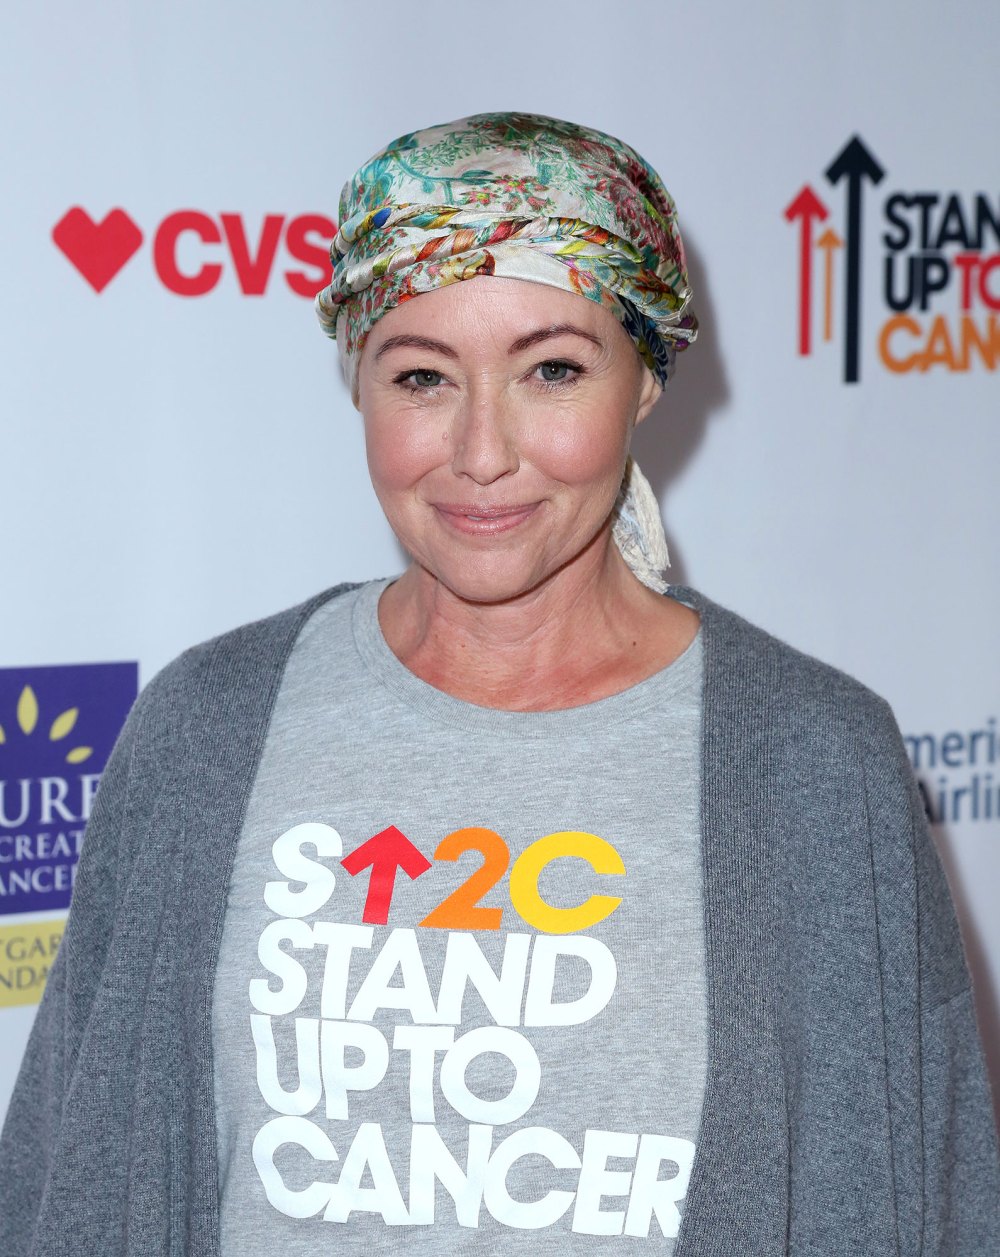 Shannen Doherty Works Out One Week After Finishing Chemo: ‘#CancerSlayer’